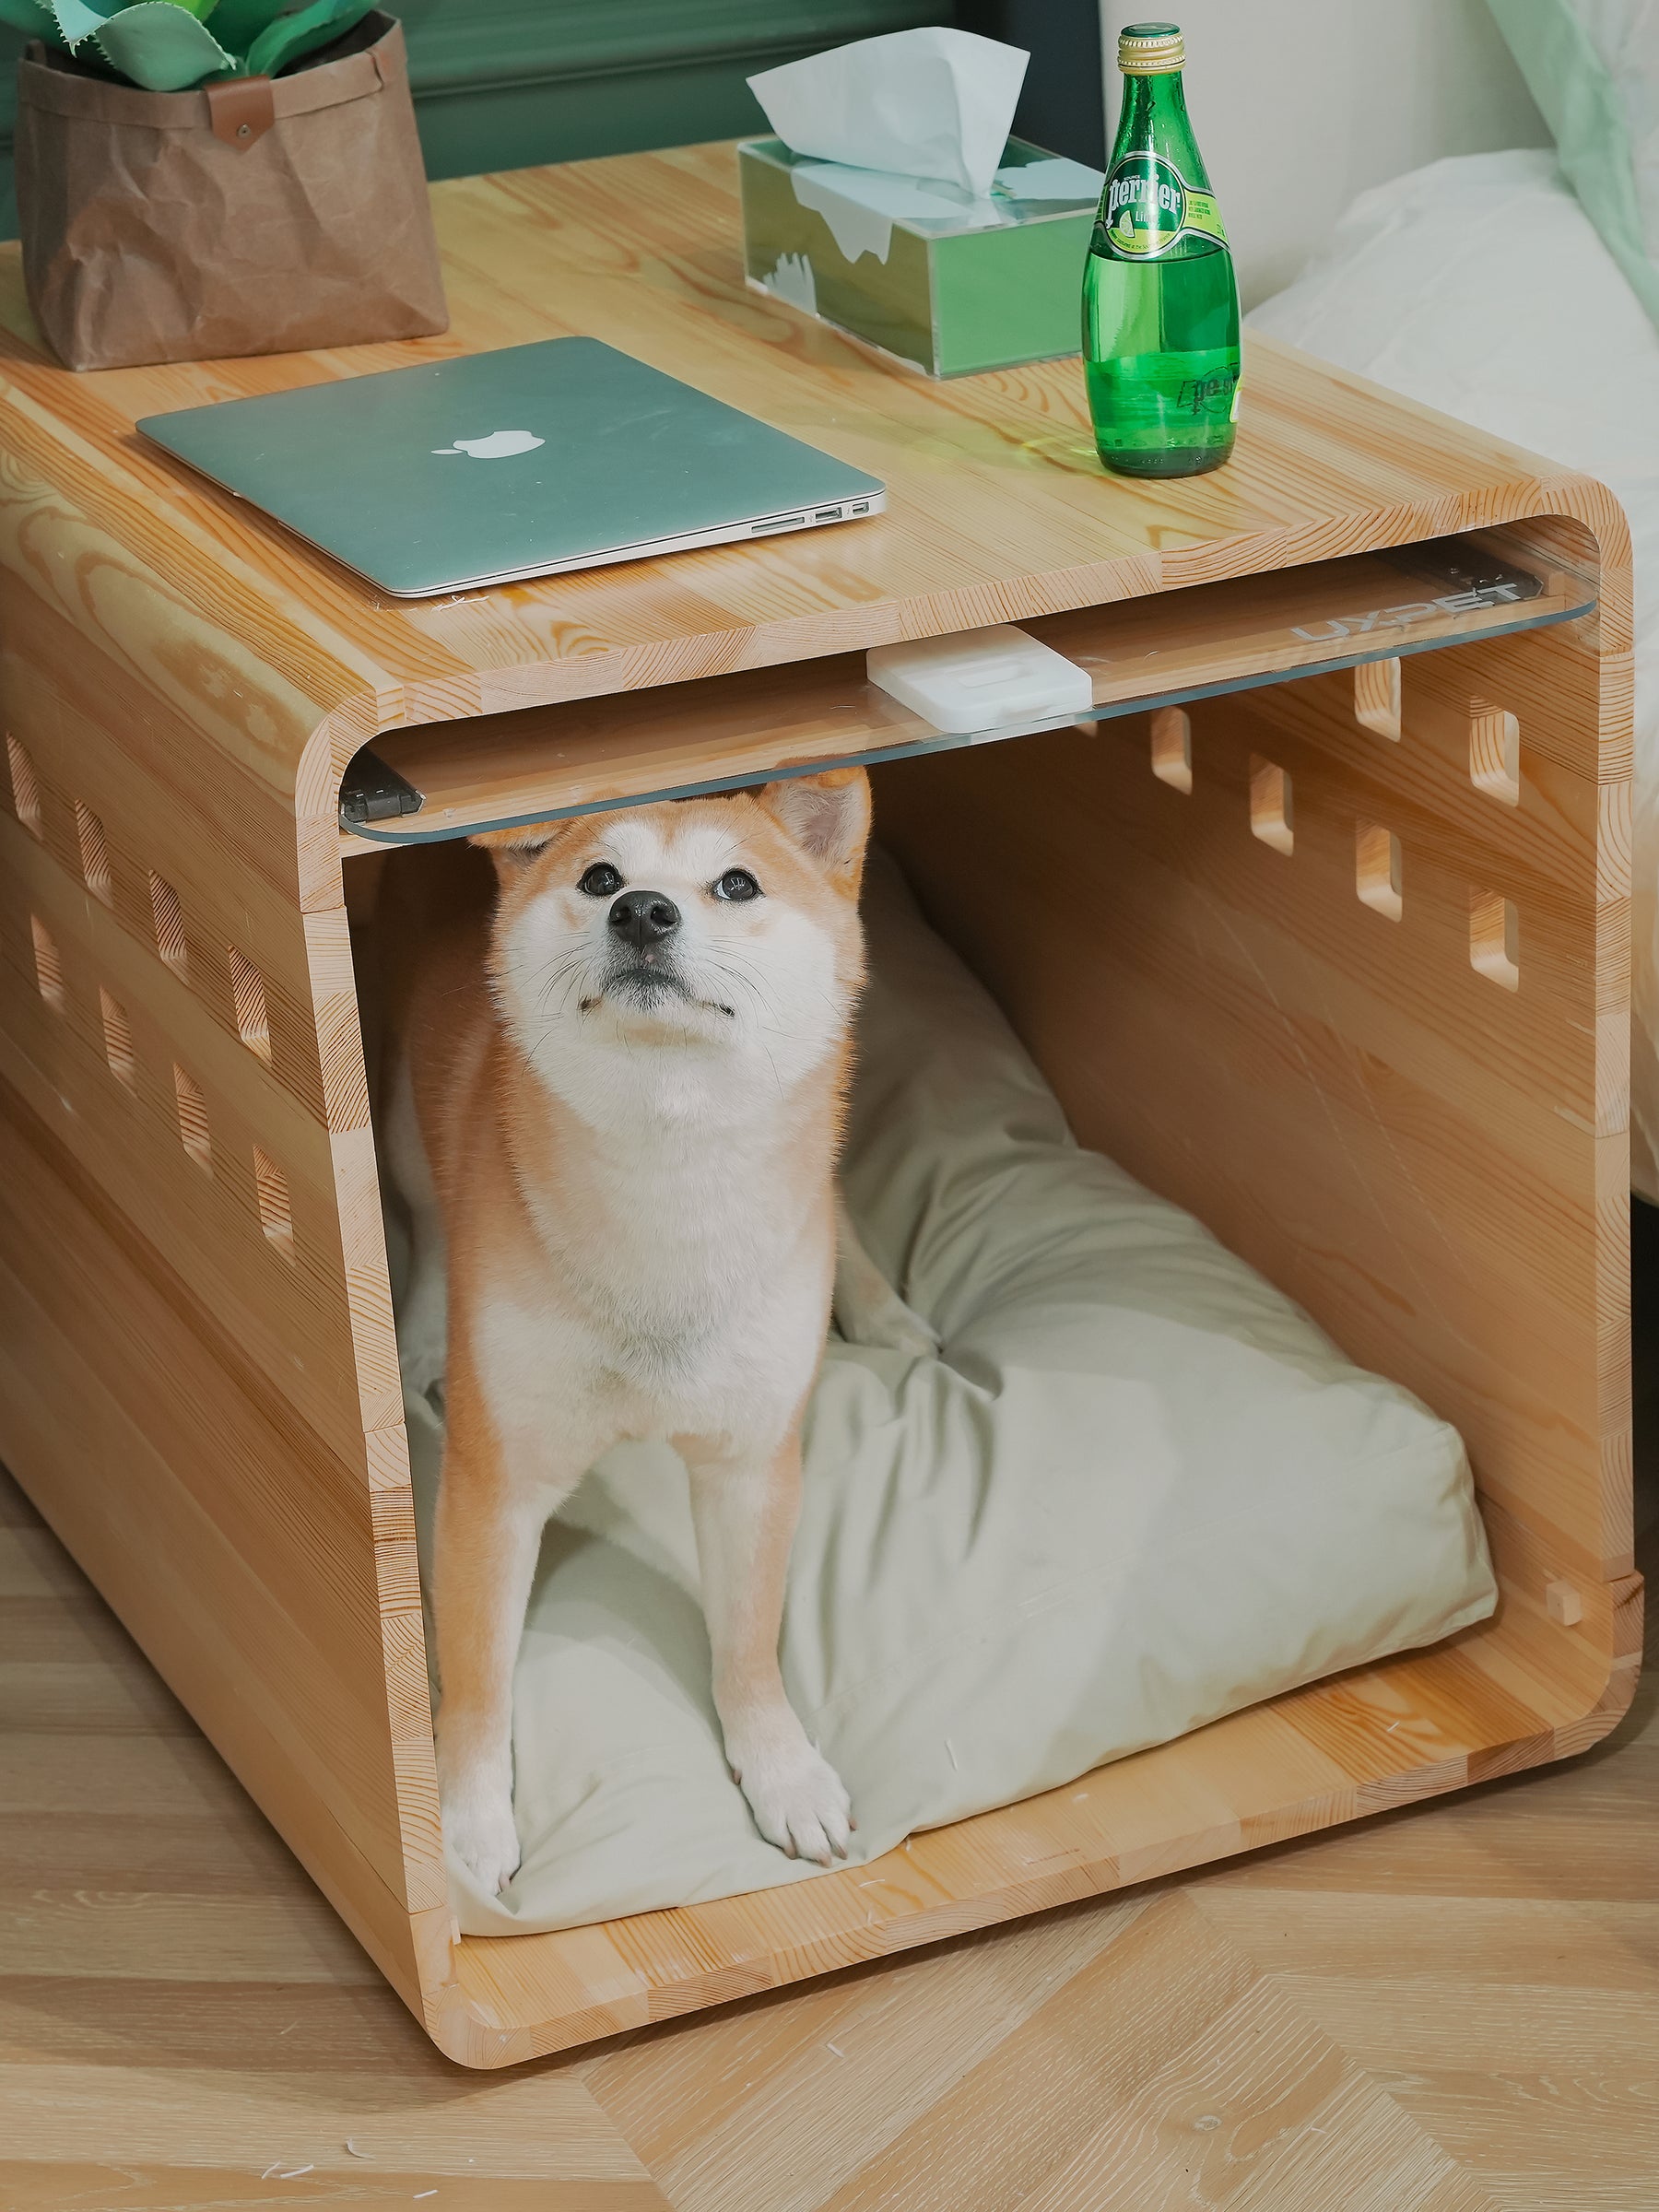 UXPET Multi-functional Wood Pet's House and Bedside Table.